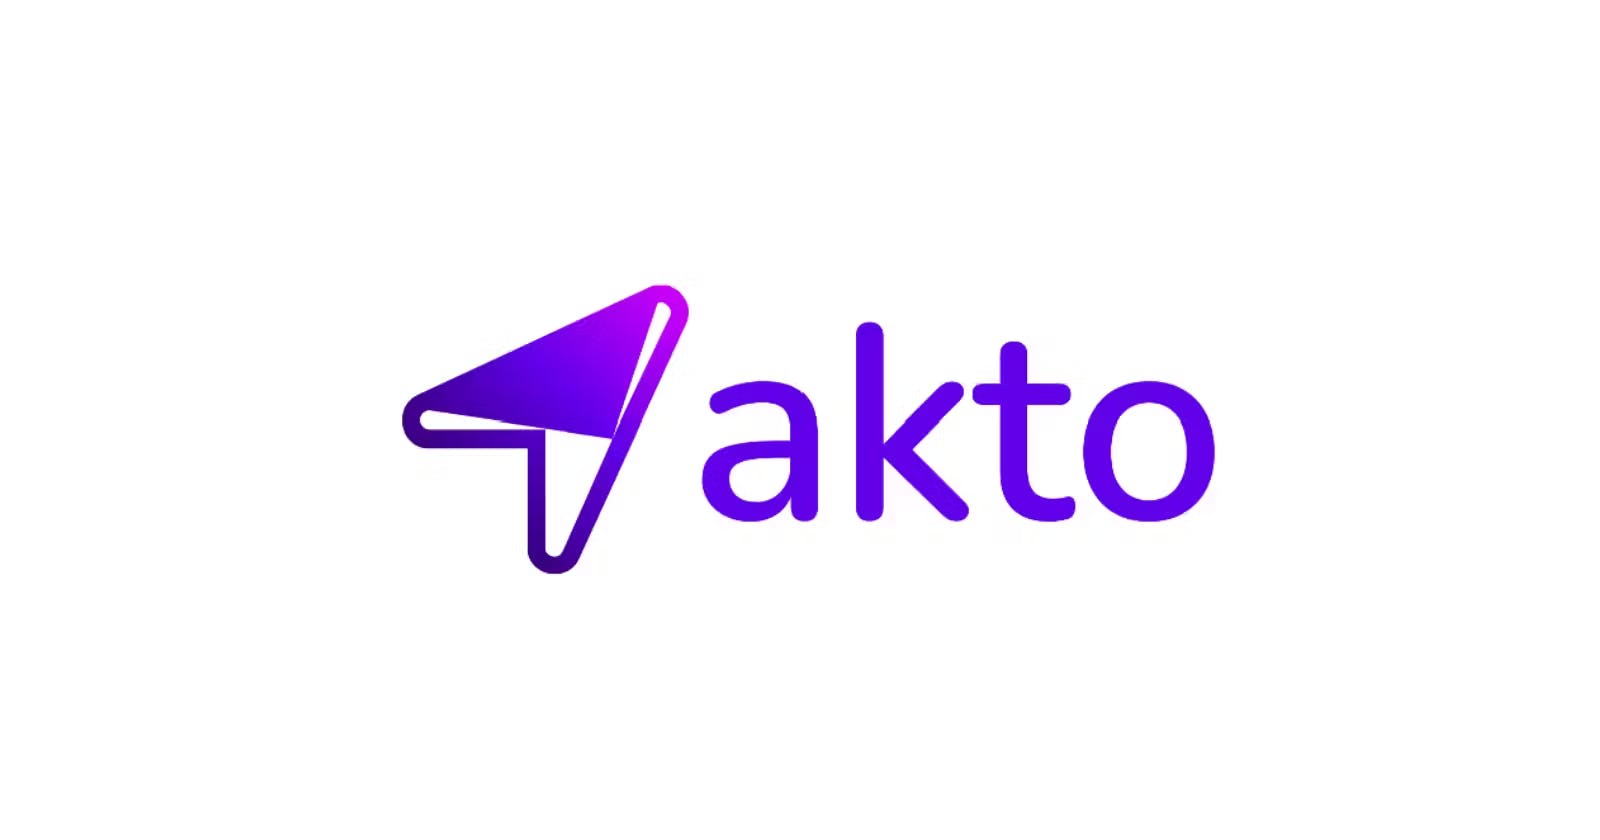 How I tested for HTTP verb tunneling using Akto?